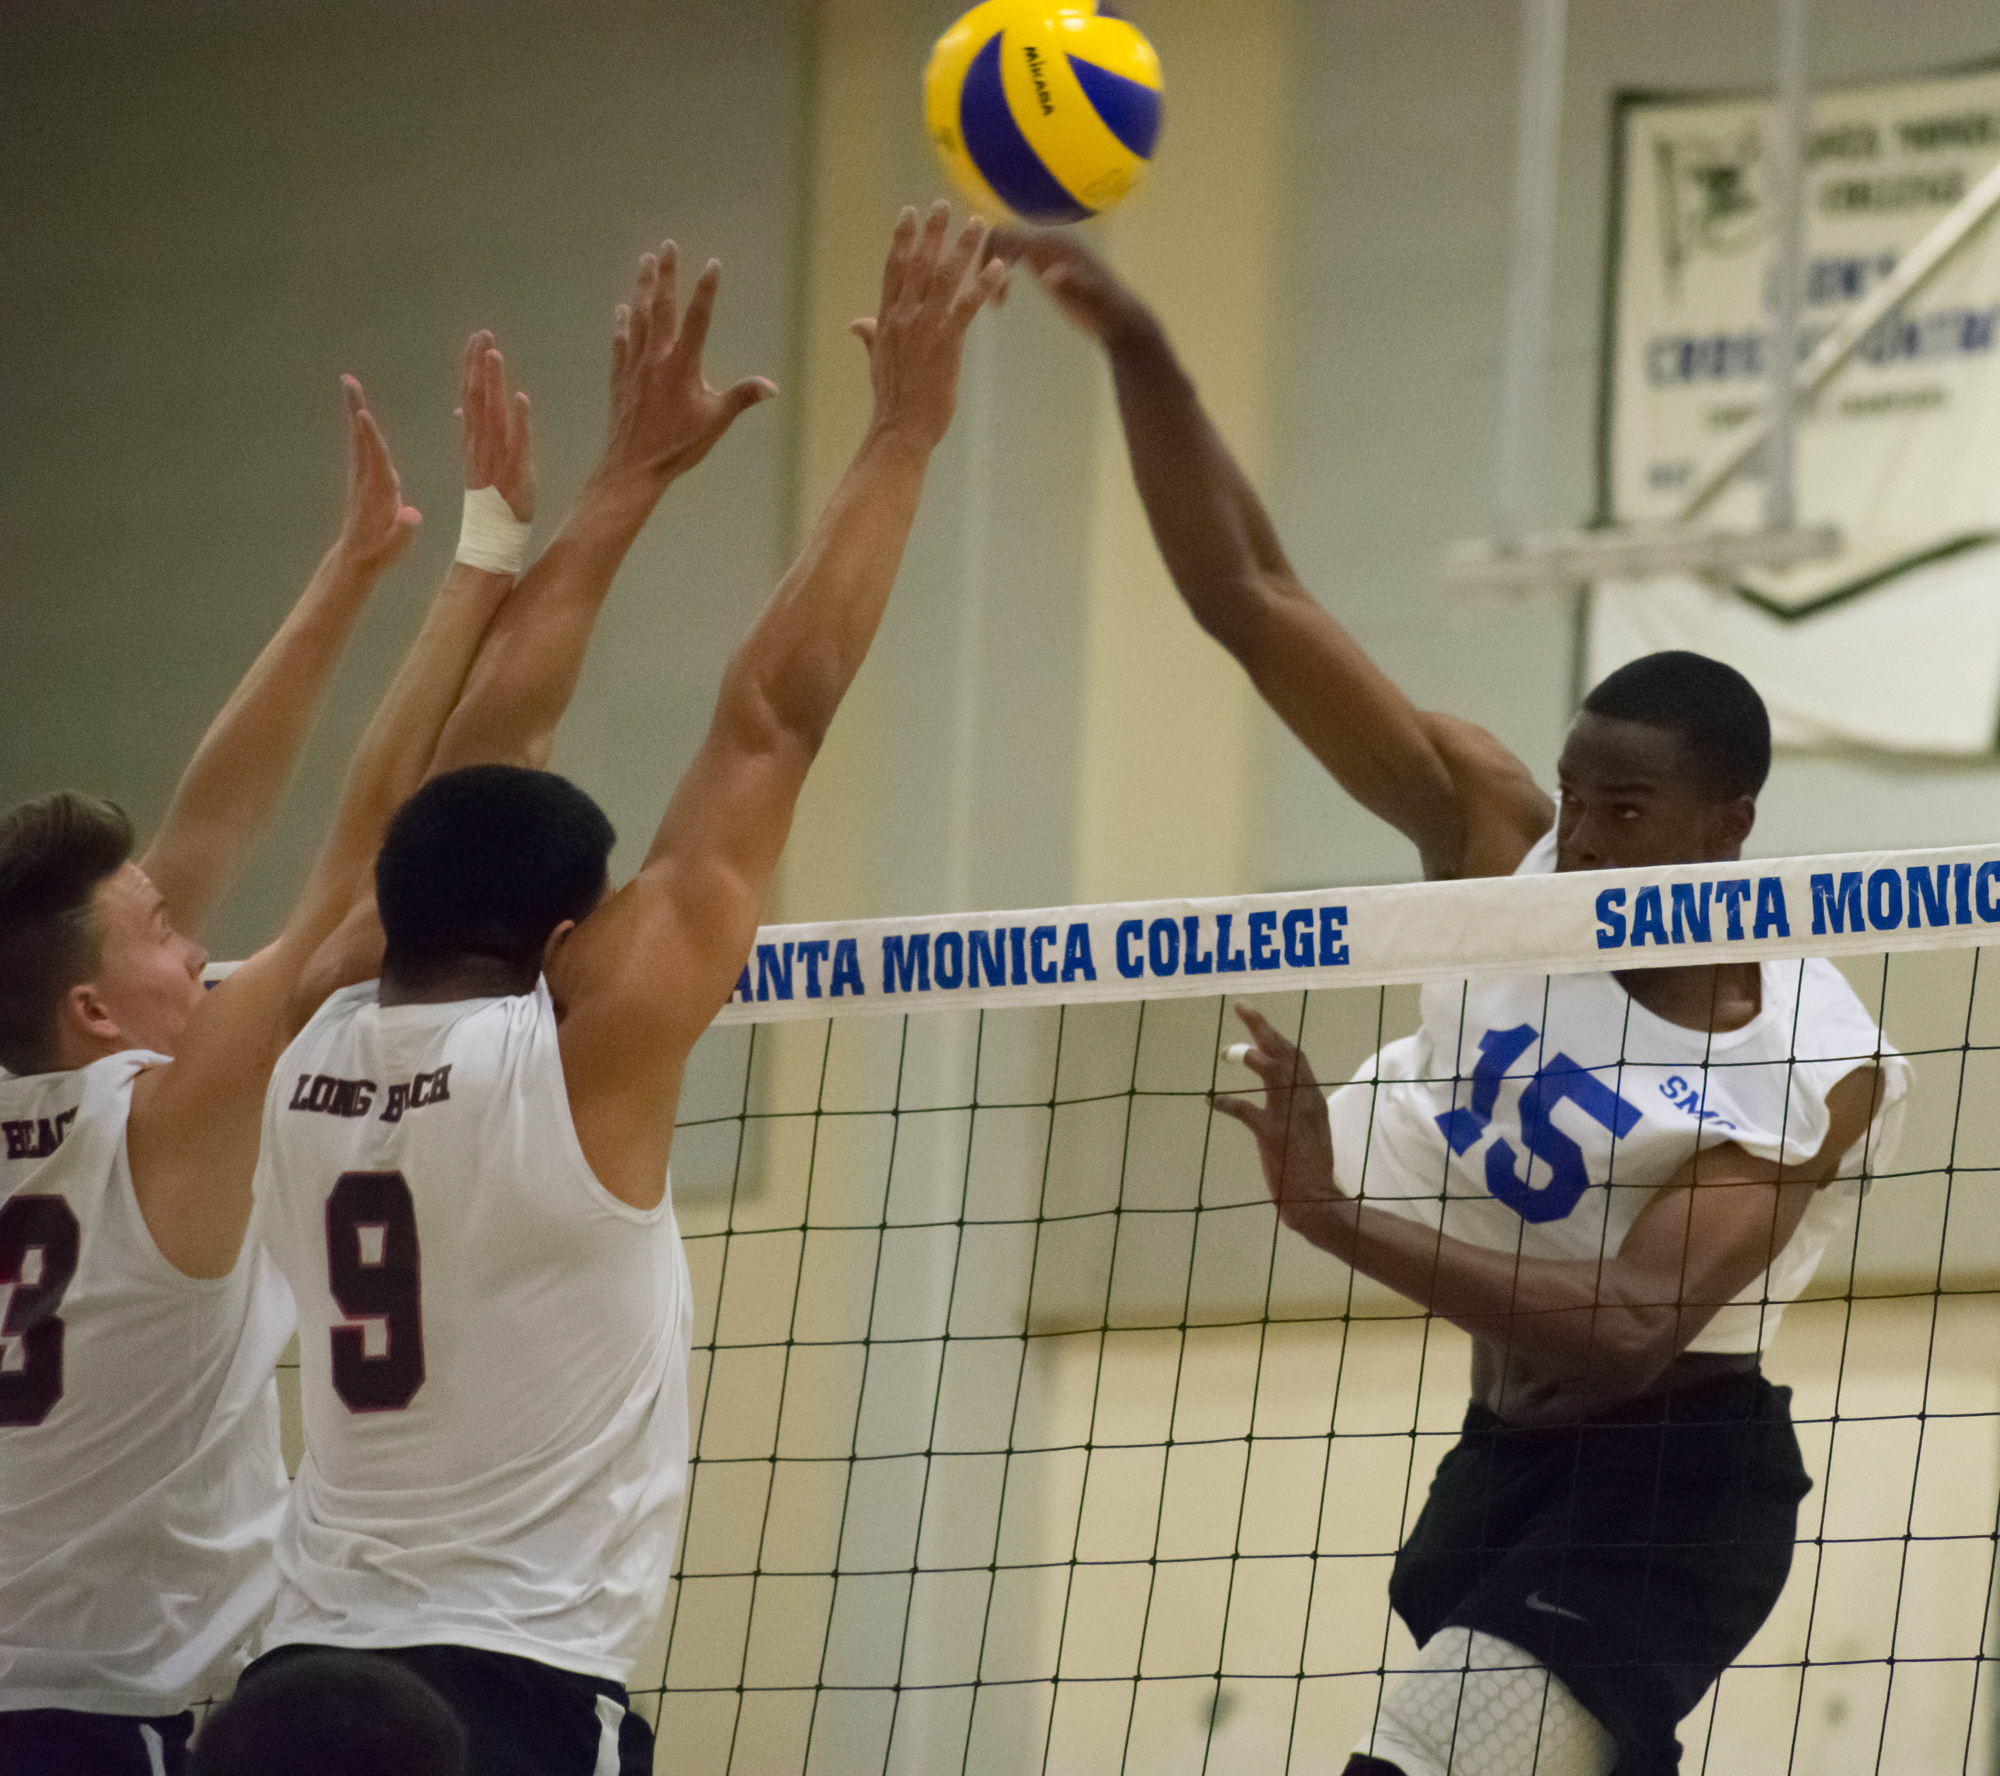  Santa Monica Corsairs sophomore and middle hitter Vecas Lewin (#15) prepares to spike the ball against the Long Beach City College Vikings during their final home game of the season on Wednesday, April 12, 2018 in the Santa Monica College gym at San